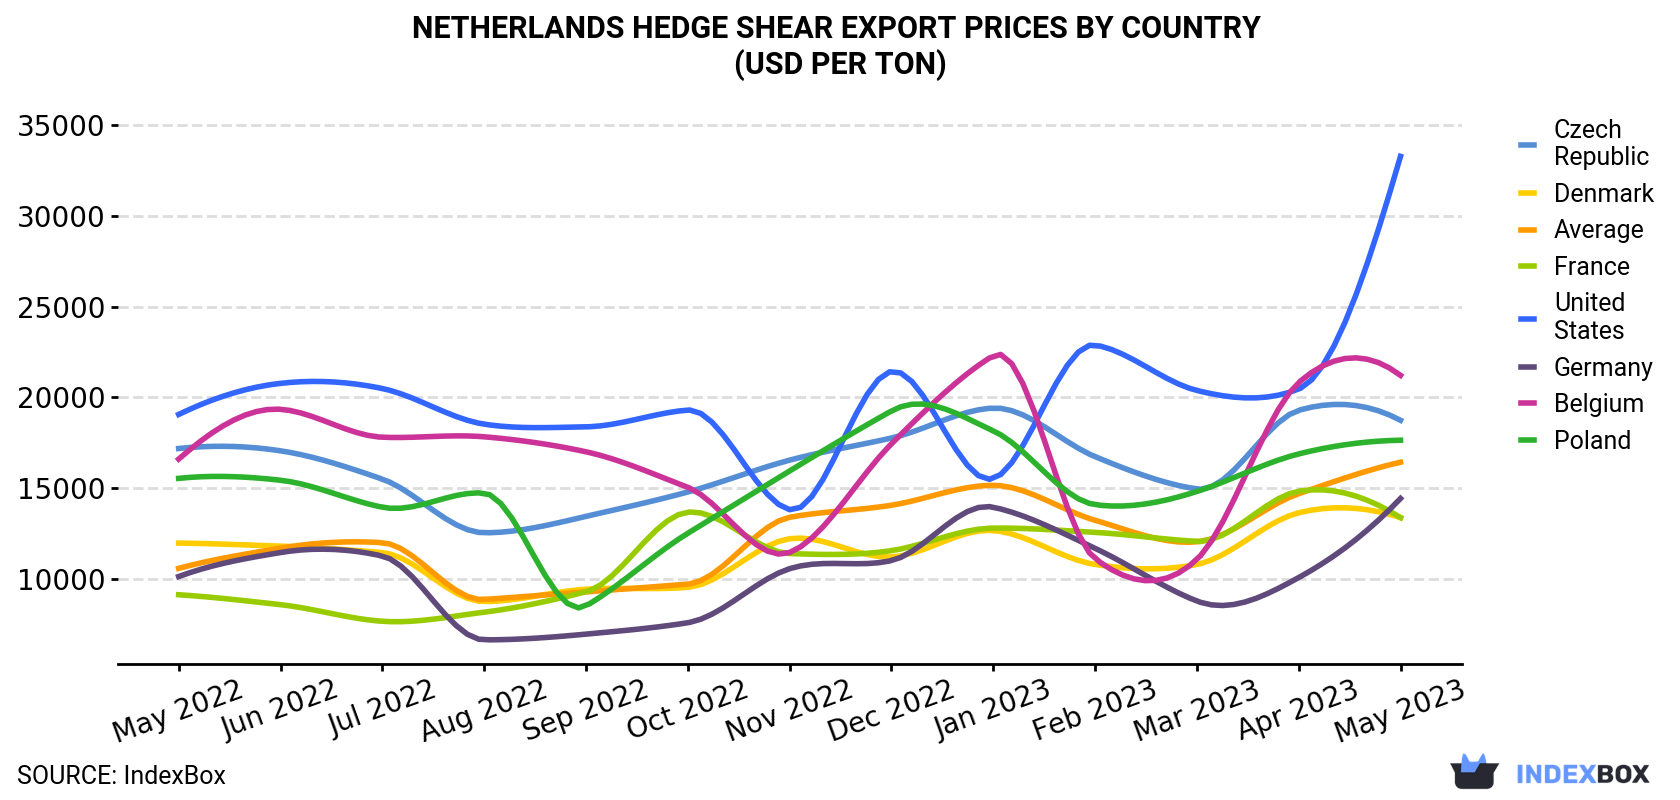 Netherlands Hedge Shear Export Prices By Country (USD Per Ton)